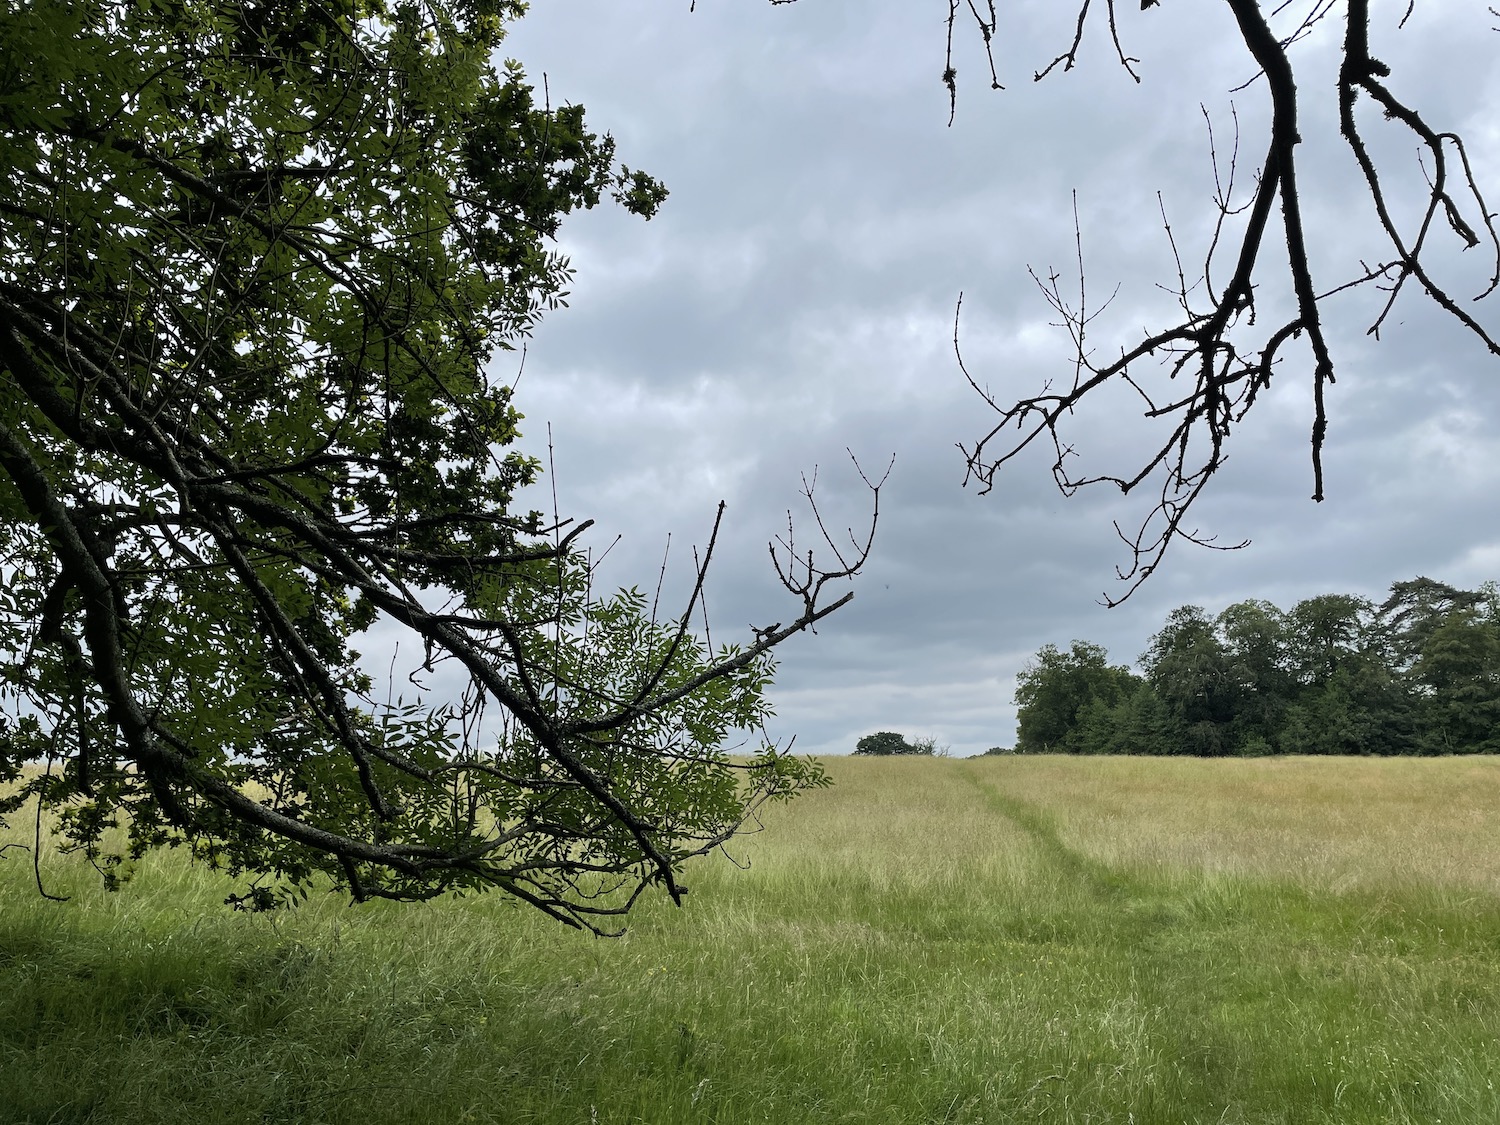 Photo of a field and trees taken with the iPhone 12 Pro